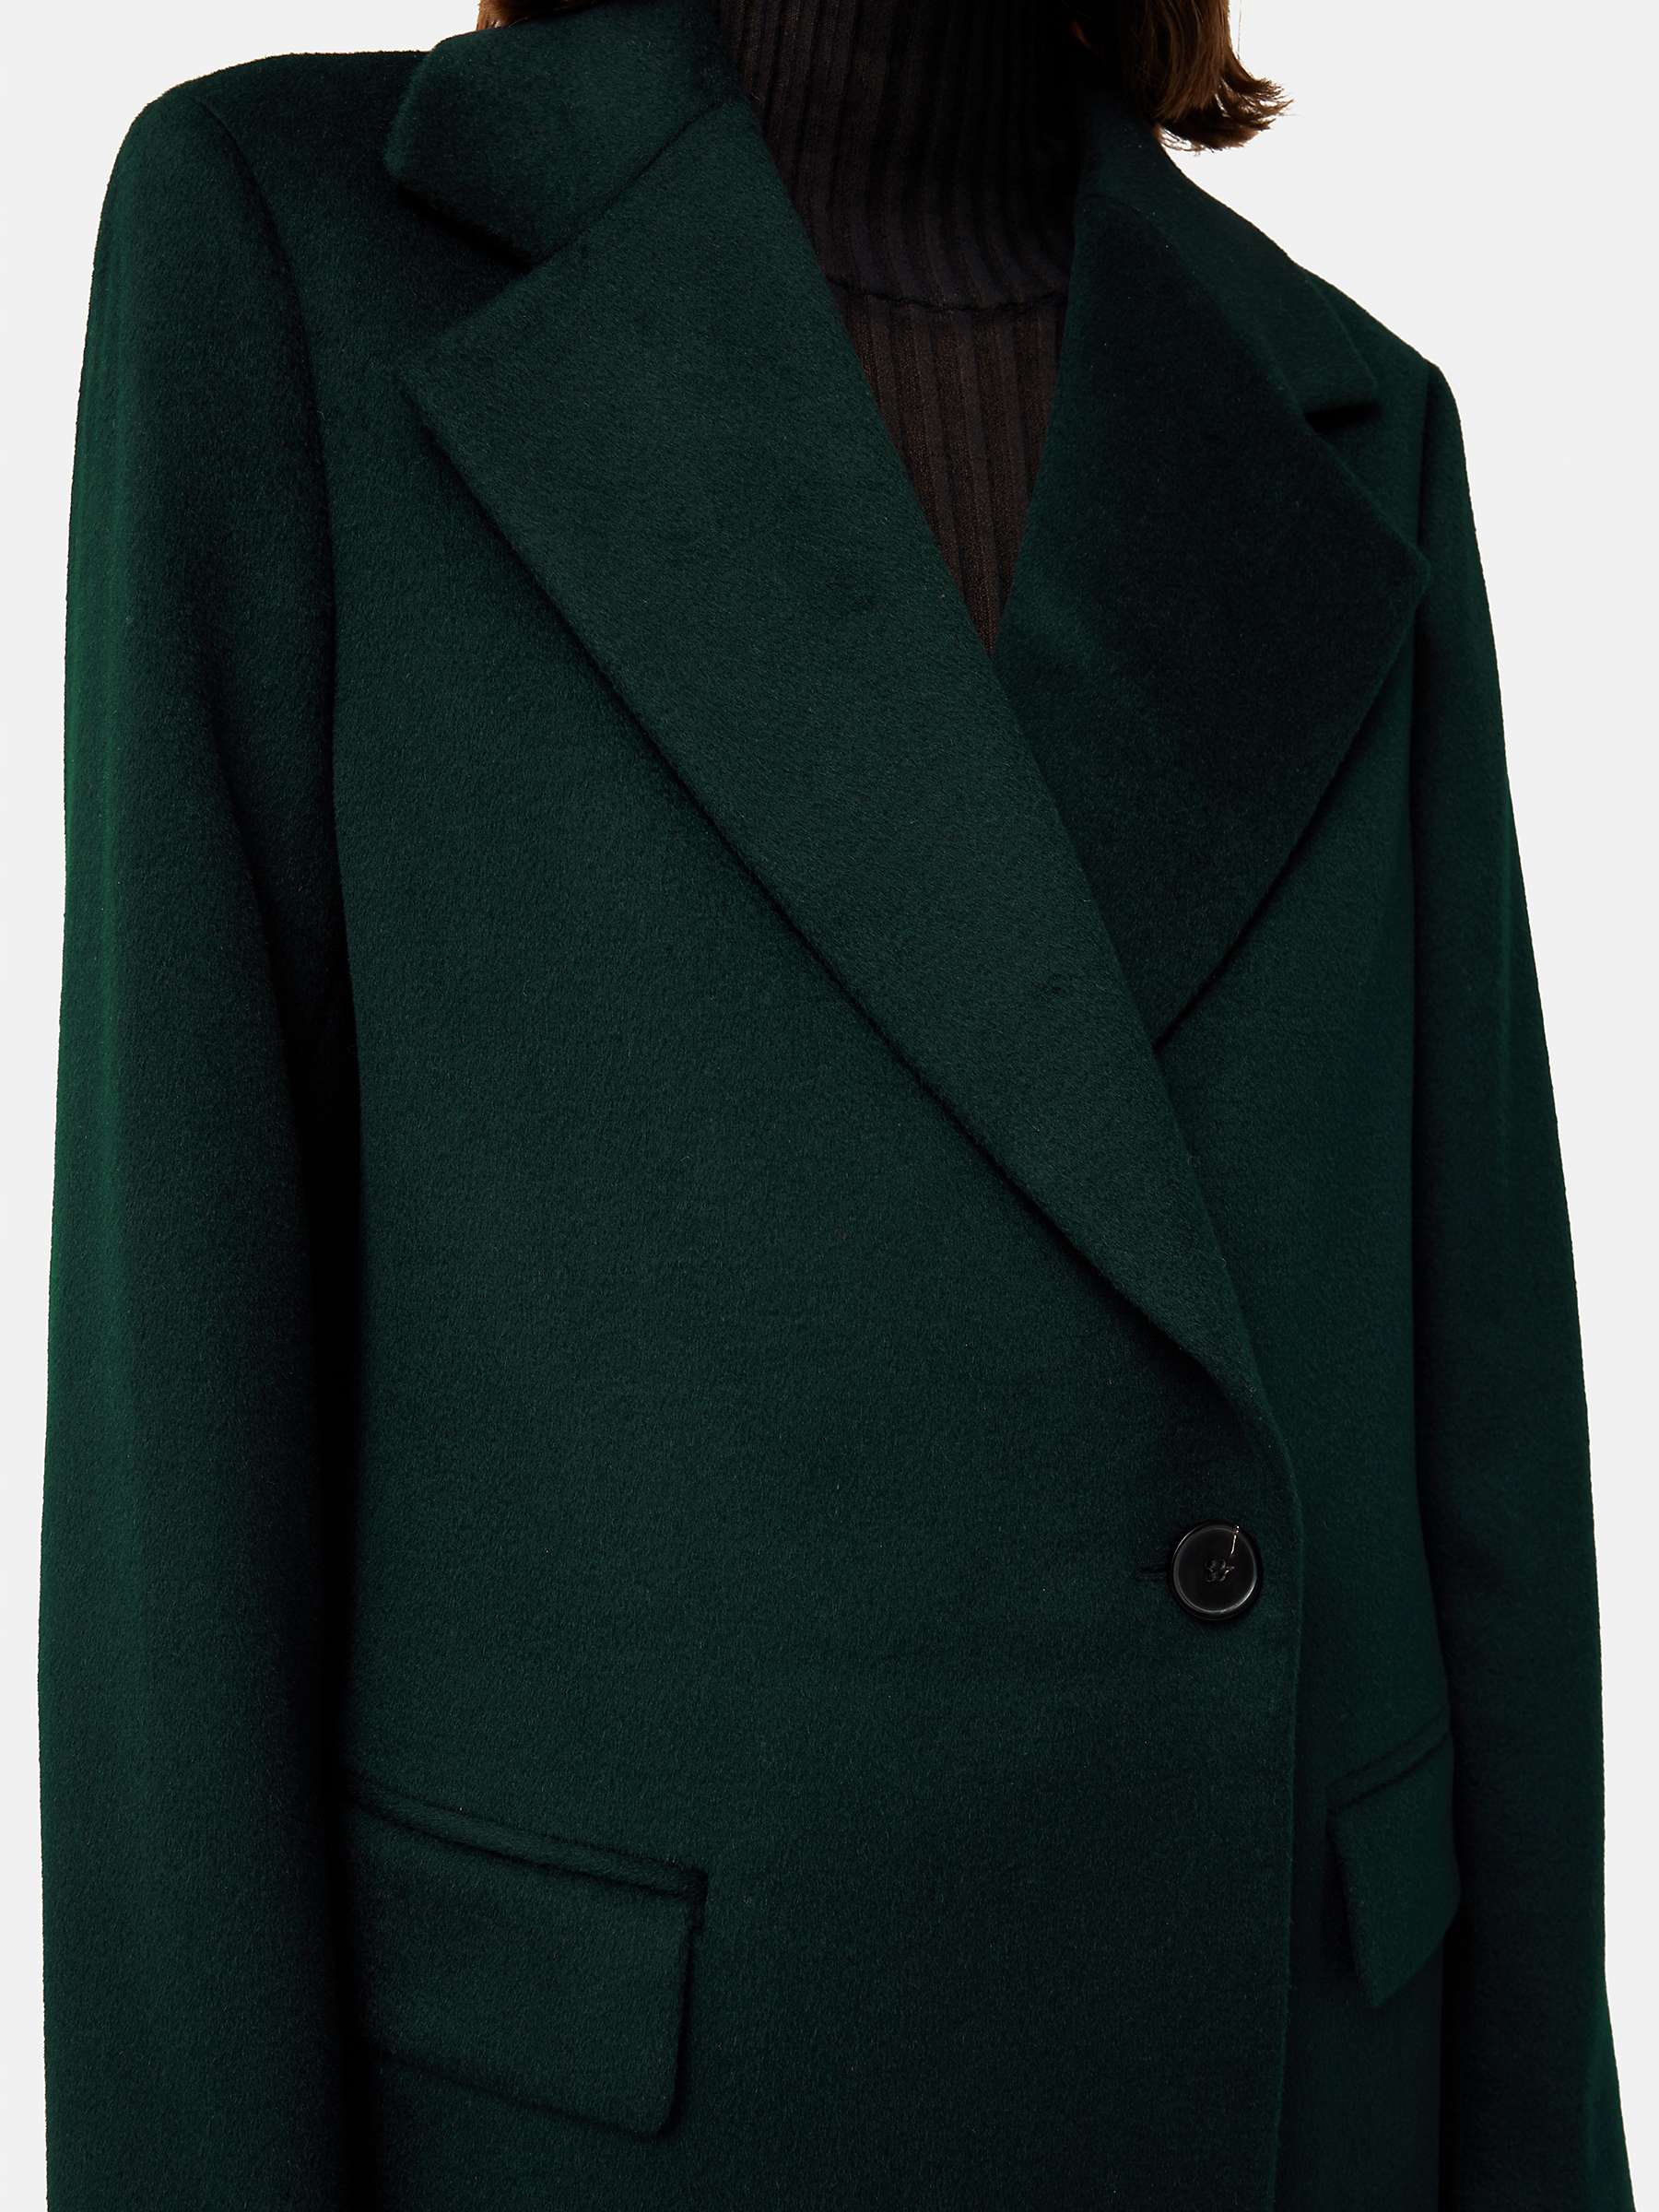 Buy Jigsaw Pure Brushed Wool Maxi City Coat Online at johnlewis.com